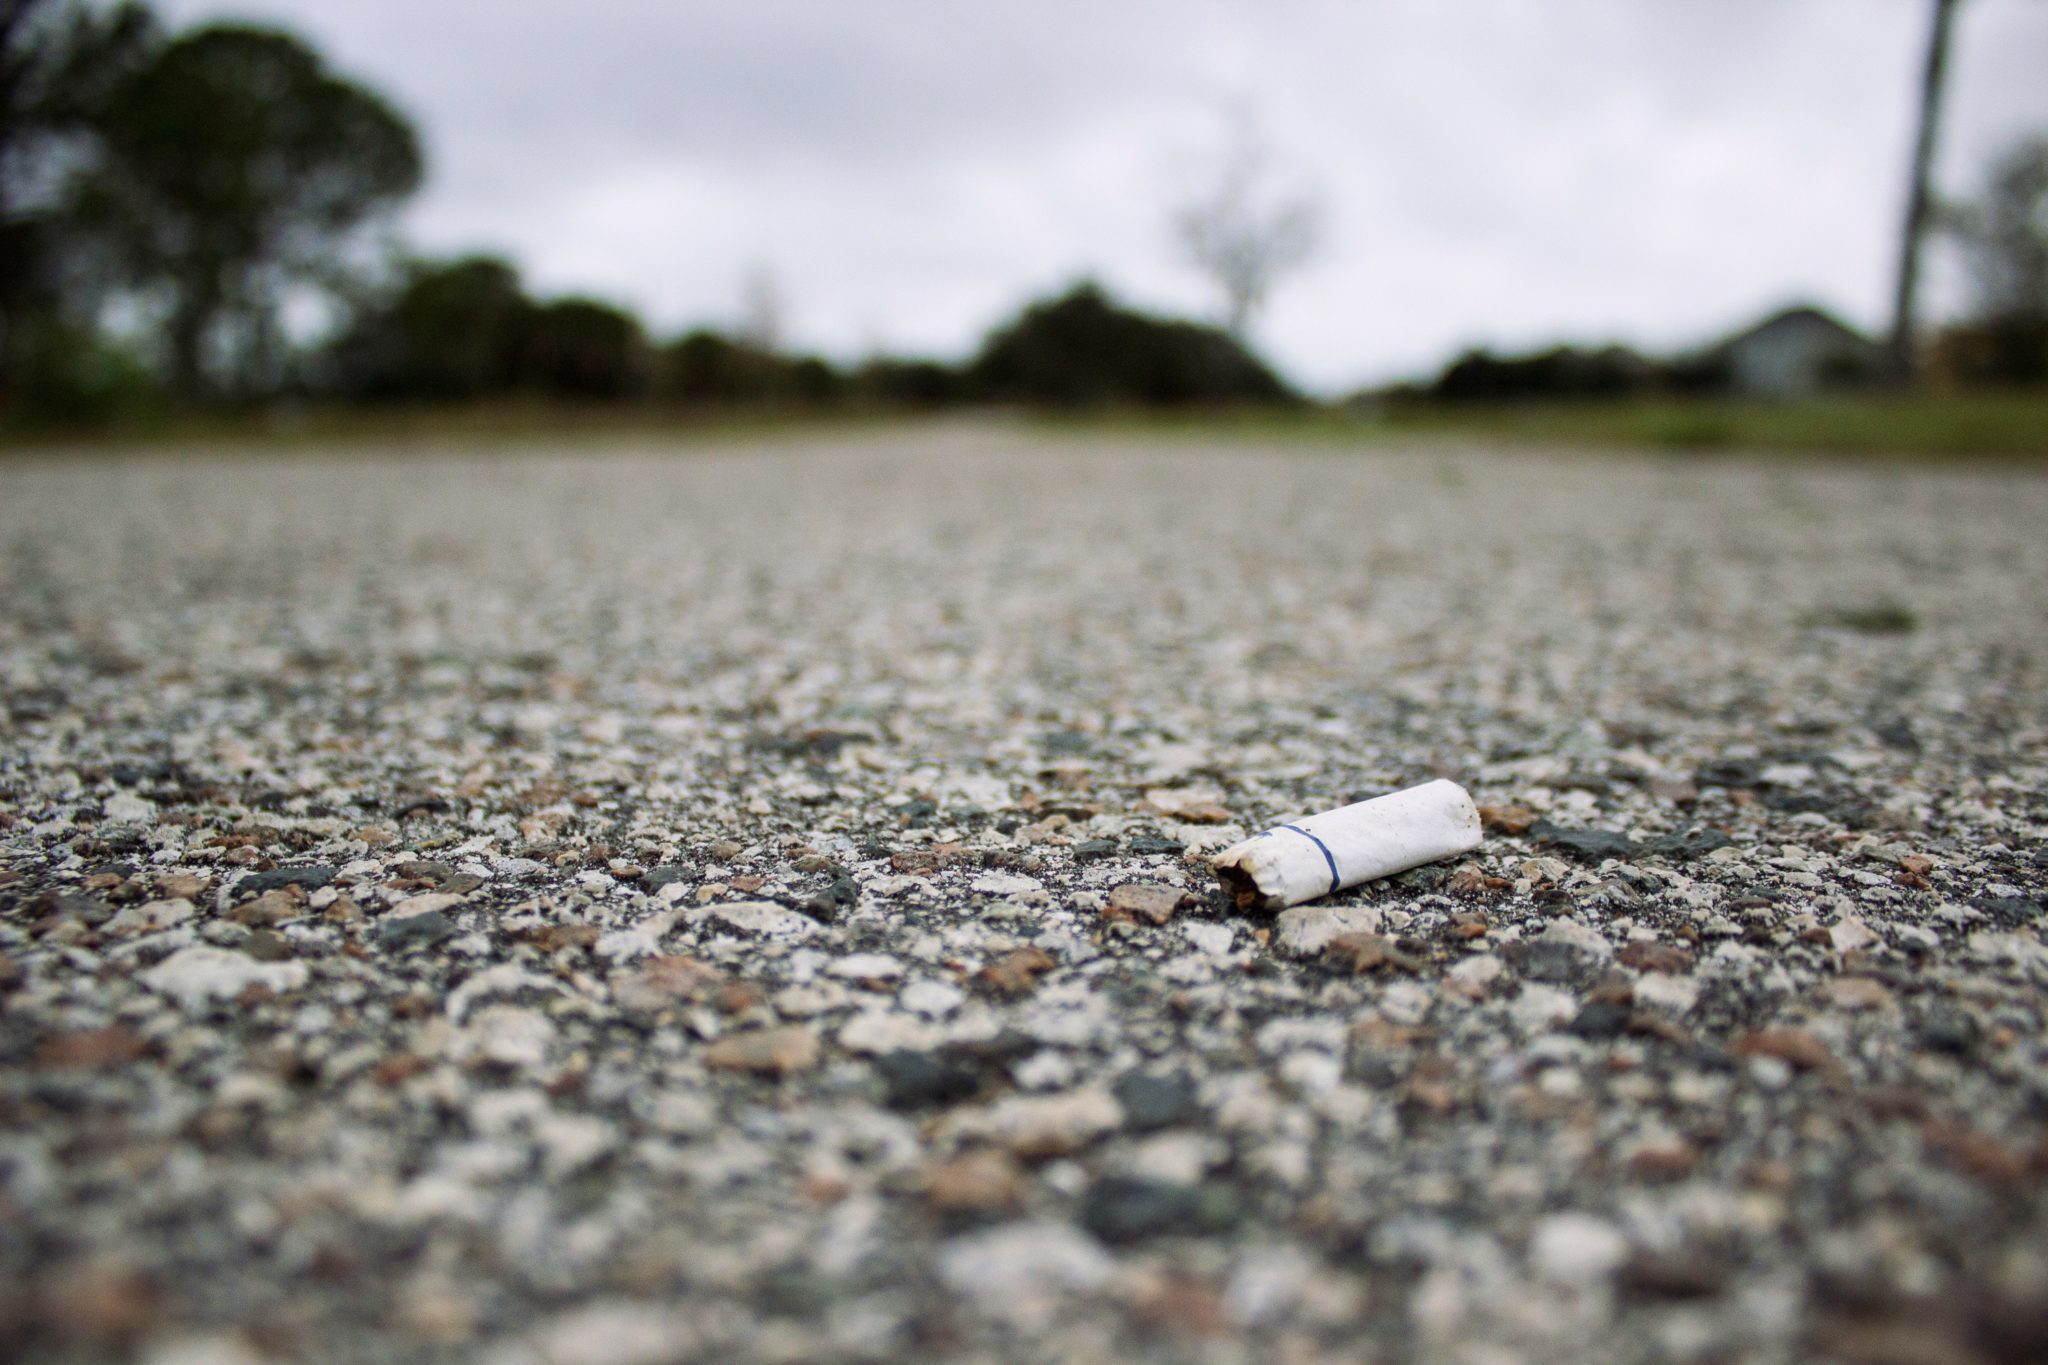 close up of cigarette butt on road.